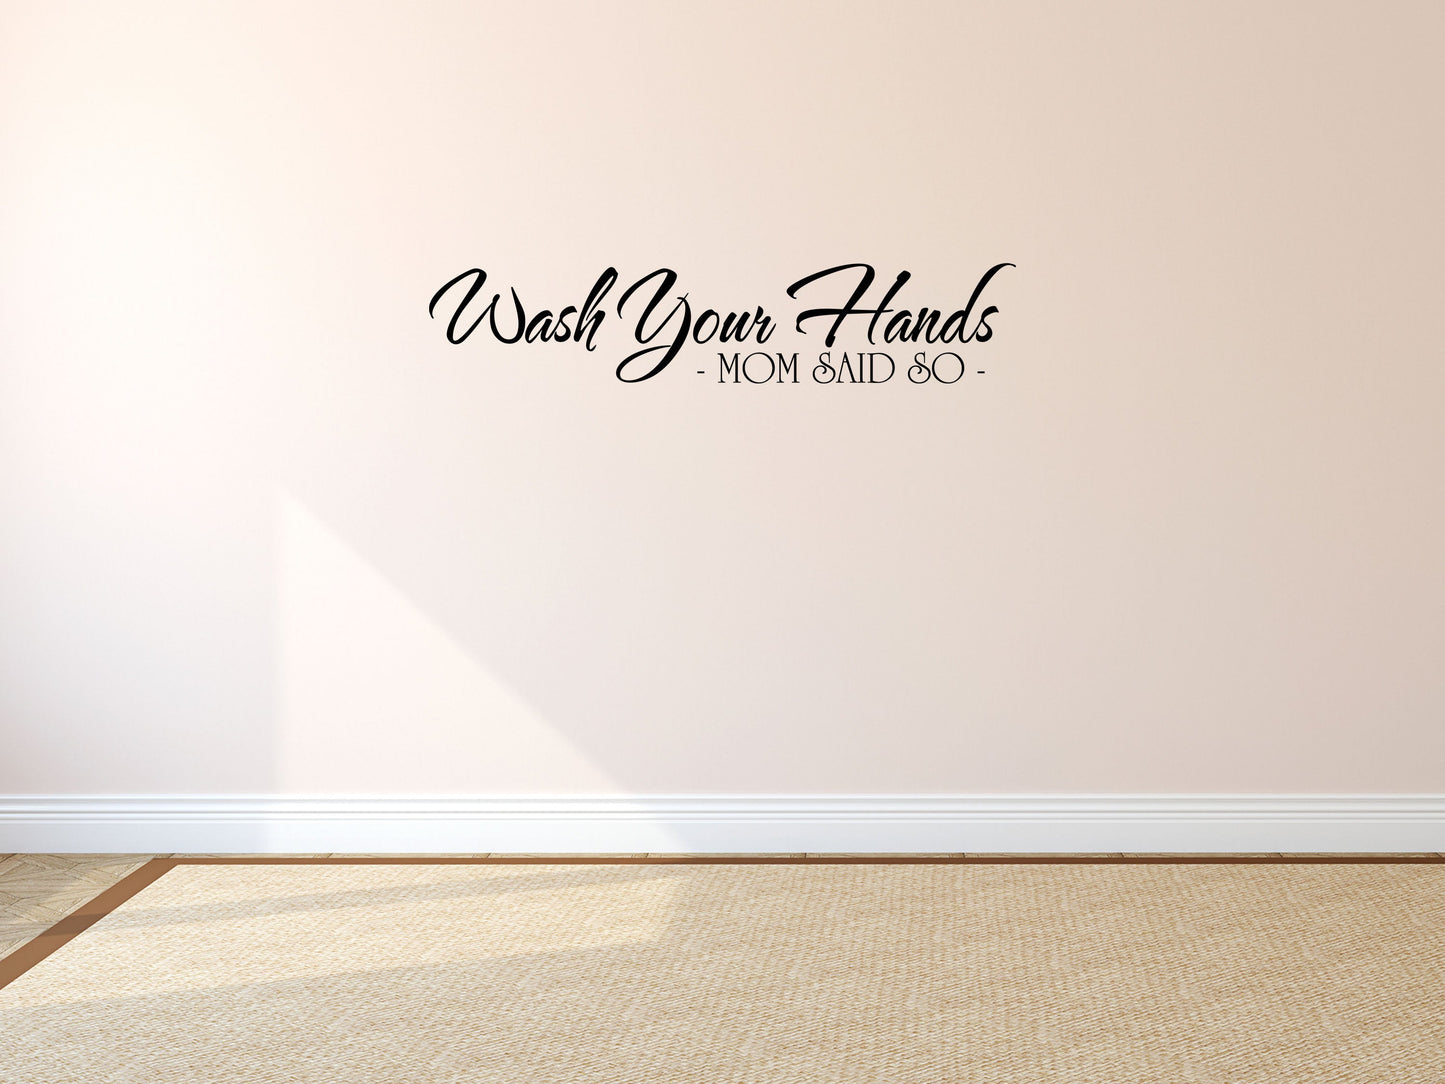 Wash Your Hands Because Mom Said So - Inspirational Wall Decals Vinyl Wall Decal Done 